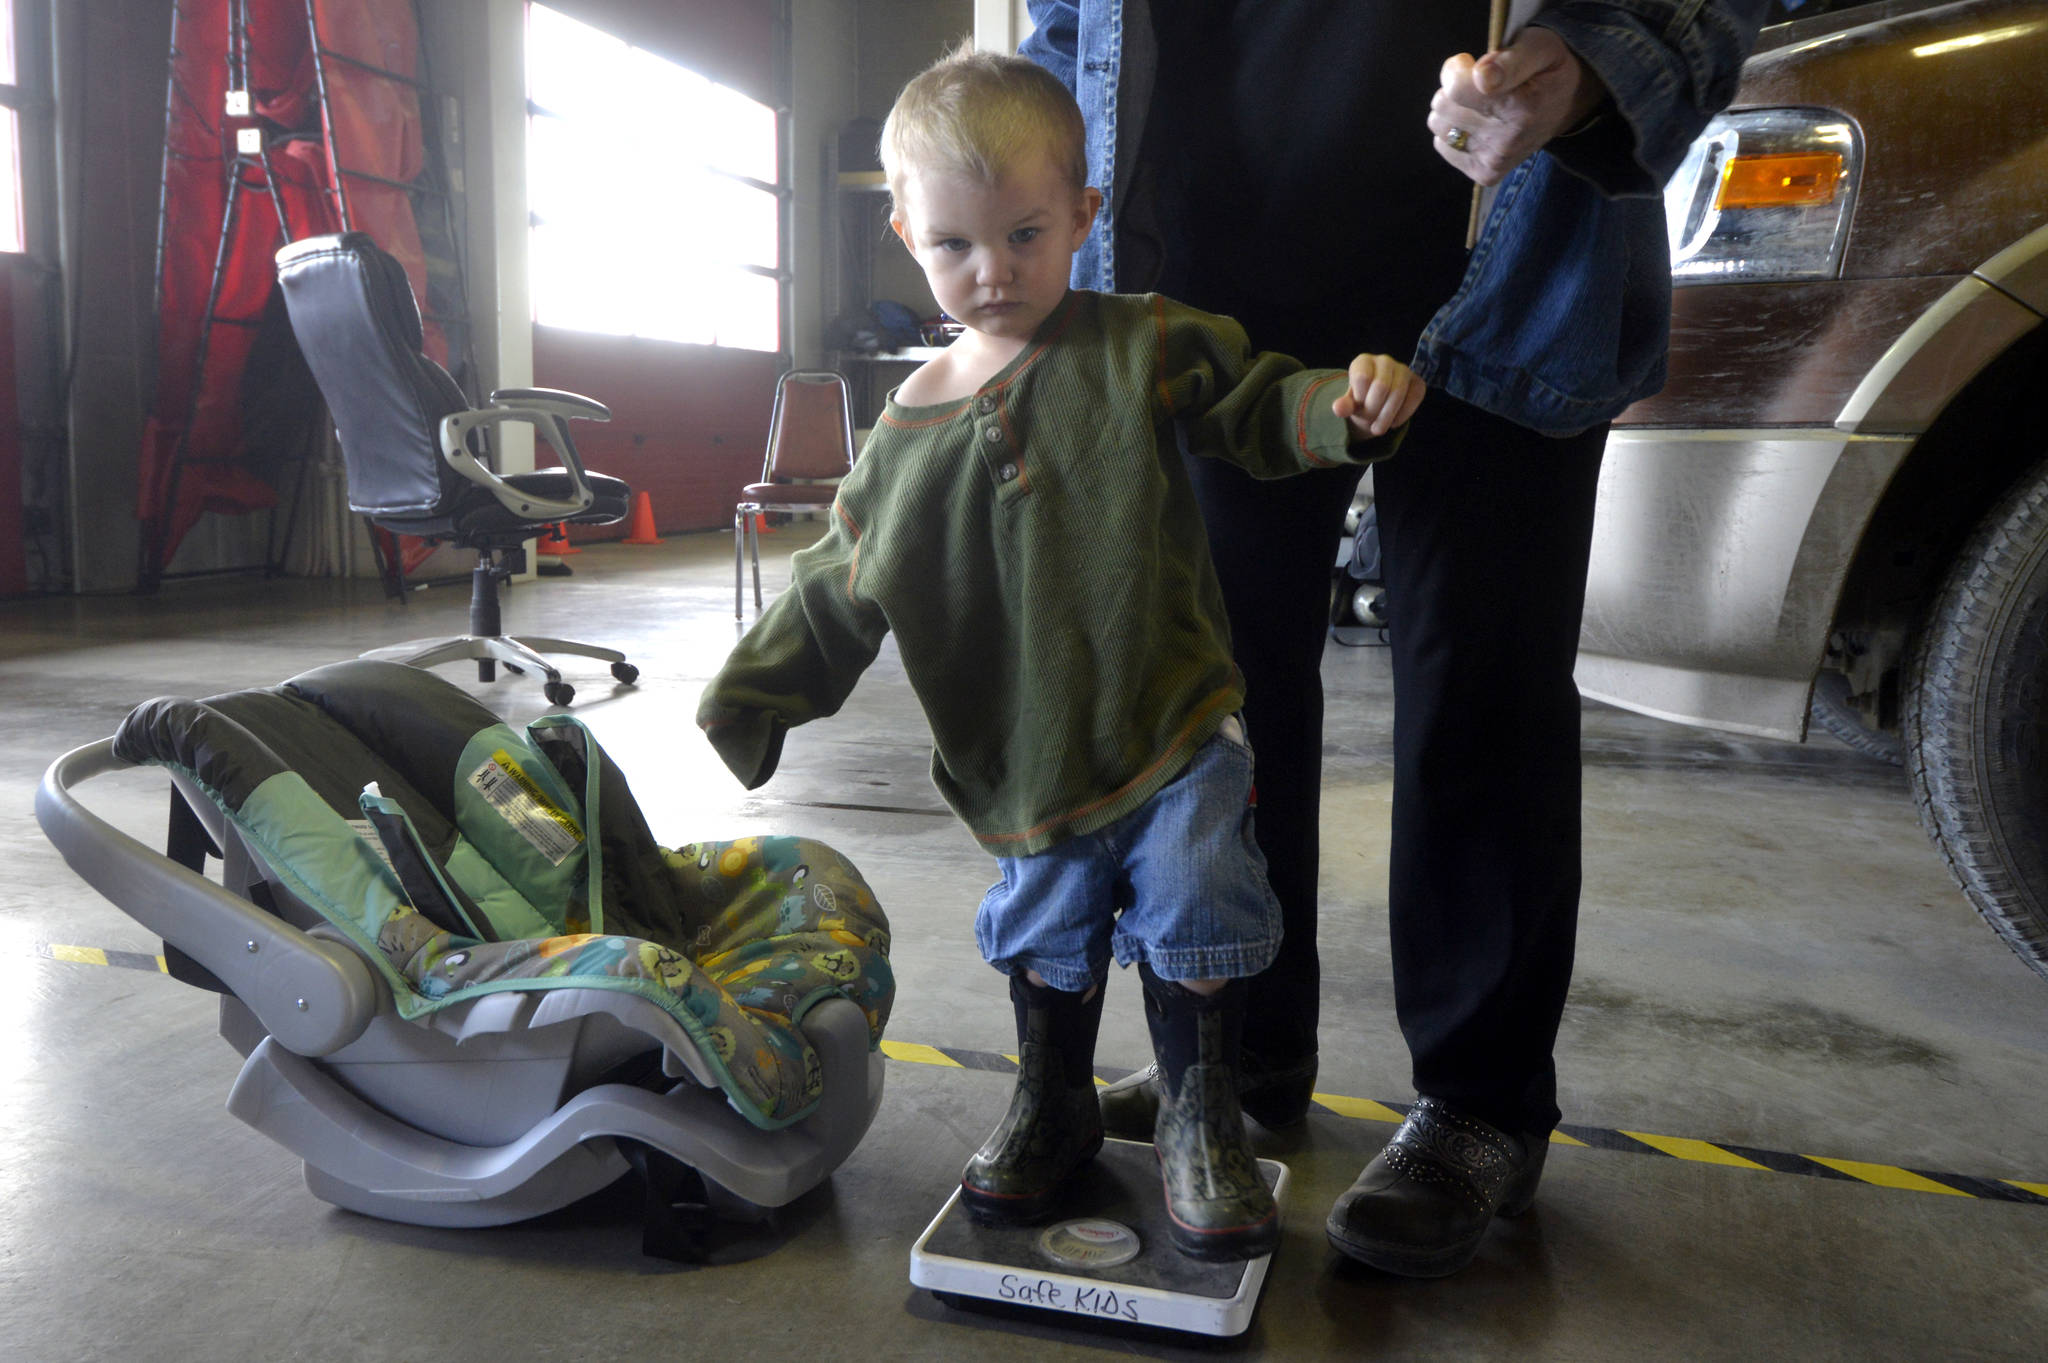 Orion Brandon, a 2-year-old from Sterling, visits the Kenai Fire Station for a free car-seat check up provided by Safe Kids Kenai Peninsula on Monday, April 17, 2017 in Kenai, Alaska. Jane Fellman, of Safe Kids and Central Peninsula Hospital, weighs Brandon to ensure he’s in the right size car seat. Safe Kids is offering another check on Wednesday from 12 to 2 p.m. at the Nikiski Fire Station. (Kat Sorensen/Peninsula Clarion)